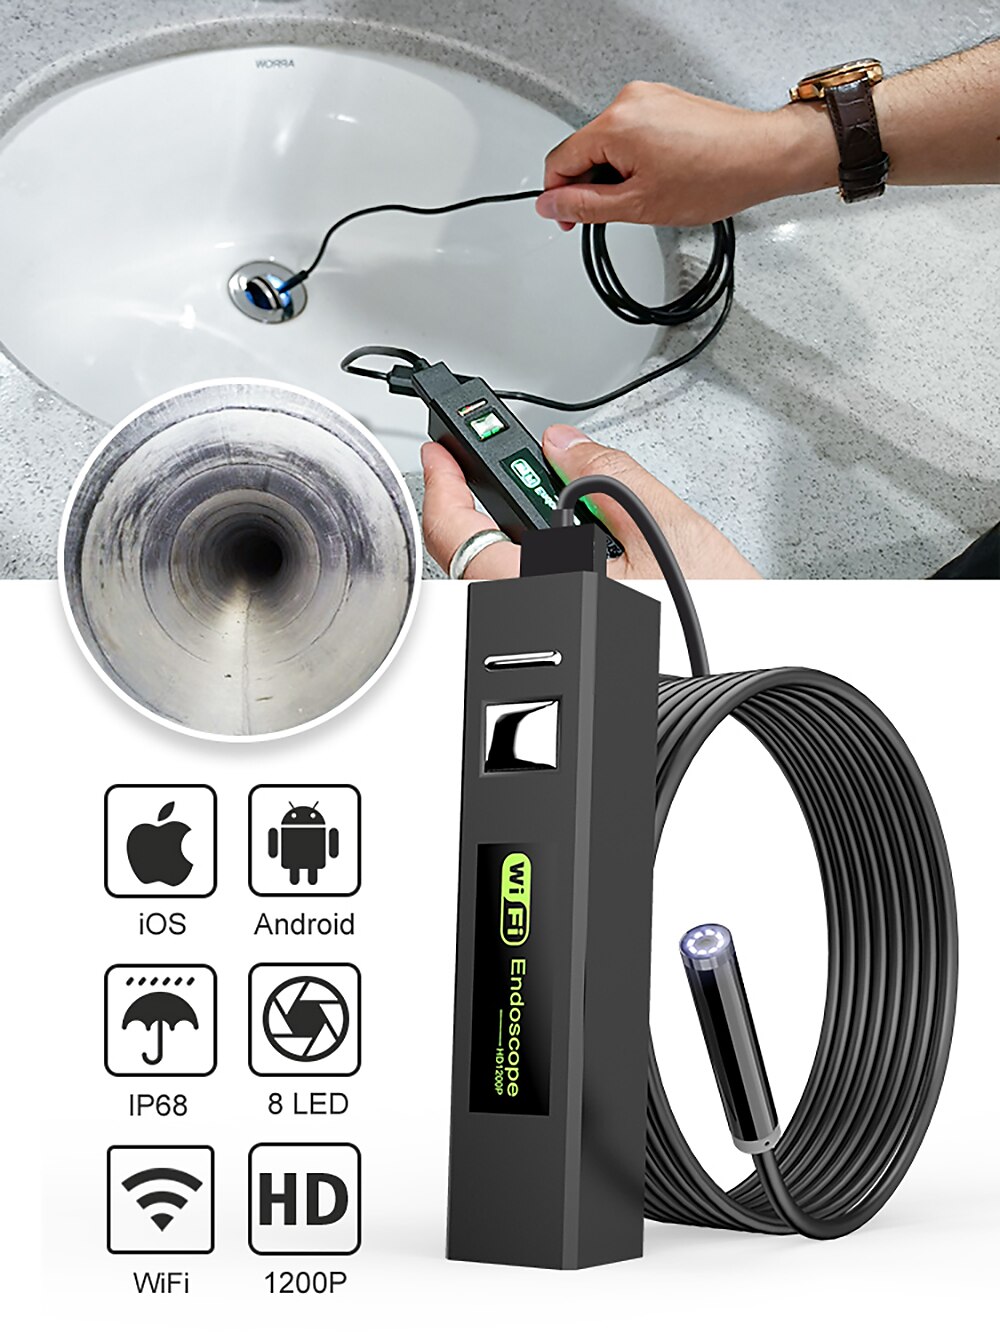 Wireless Endoscope 2MP 1200P Full HD WiFi Borescope with 32.8FT Inspection Camera iOS IP68 Waterproof Snake Camera for Android Window MAC Cable and 8 LEDs 10M 